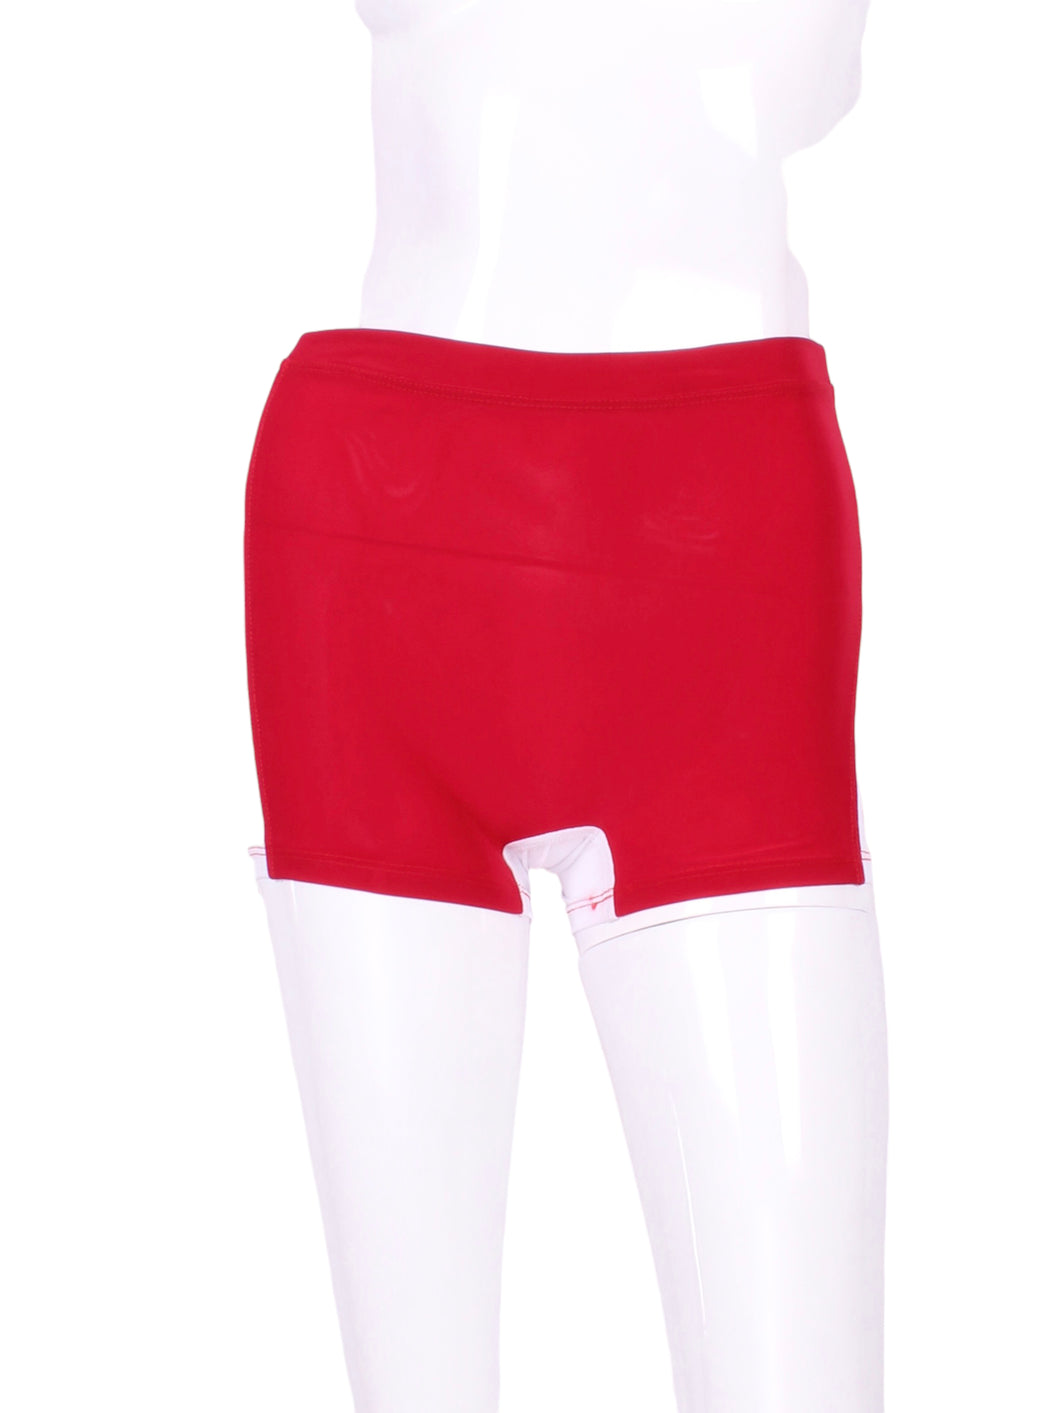 These sexy white low rise shorts are going to want to be seen!   Very light and airy.  The perfect underwear to have for the court-to-cocktails tennis dresses.  Reach up higher for that serve - and show off your LOVE shorties!